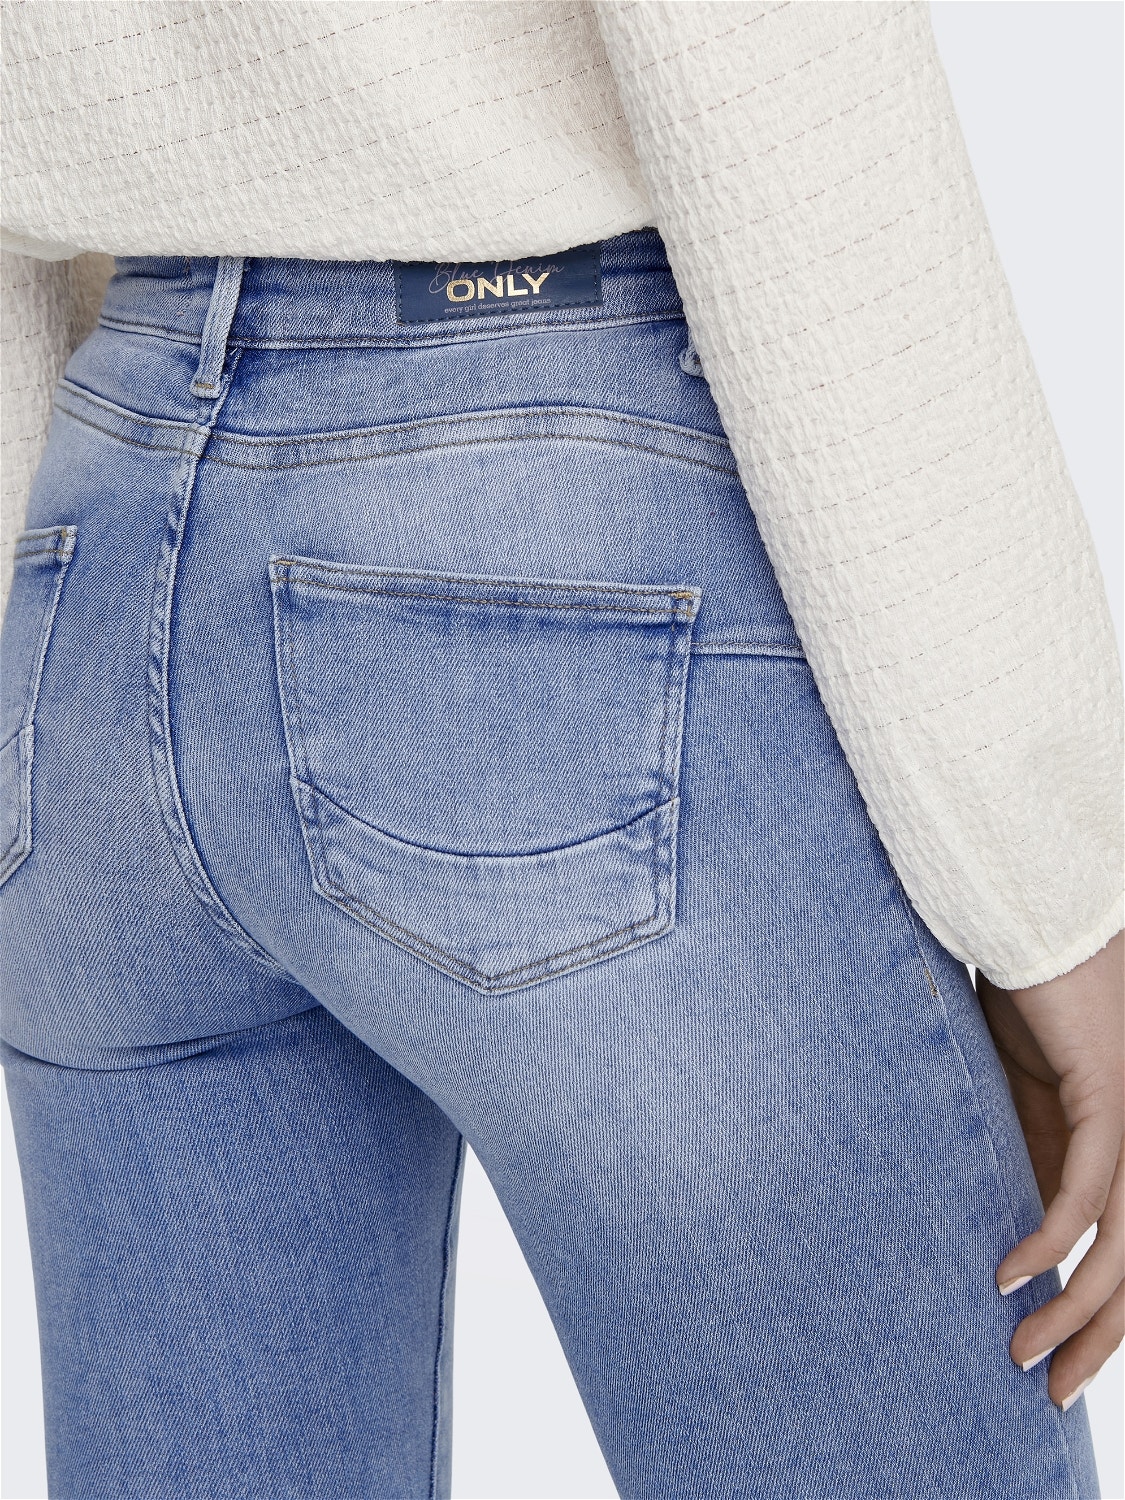 ONLY Jeans Skinny Fit Taille moyenne -Special Bright Blue Denim - 15250273